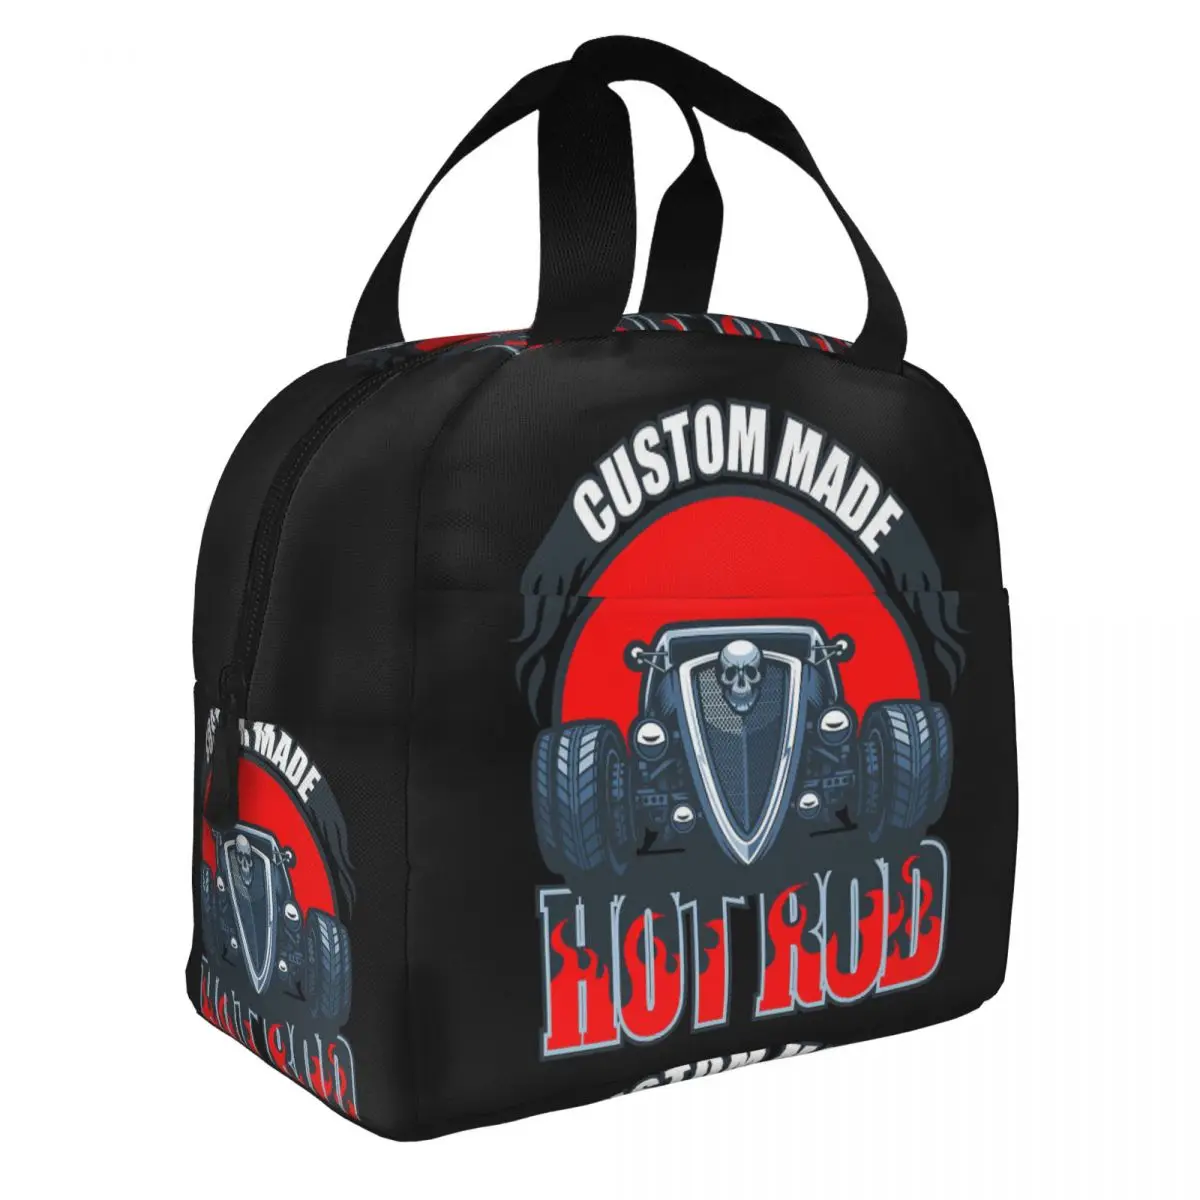 Made Hotrod Hot Rod Vintage Retro Car Lunch Bento Bag Portable Aluminum Foil thickened Thermal Cloth Lunch Bag for Women Men Boy